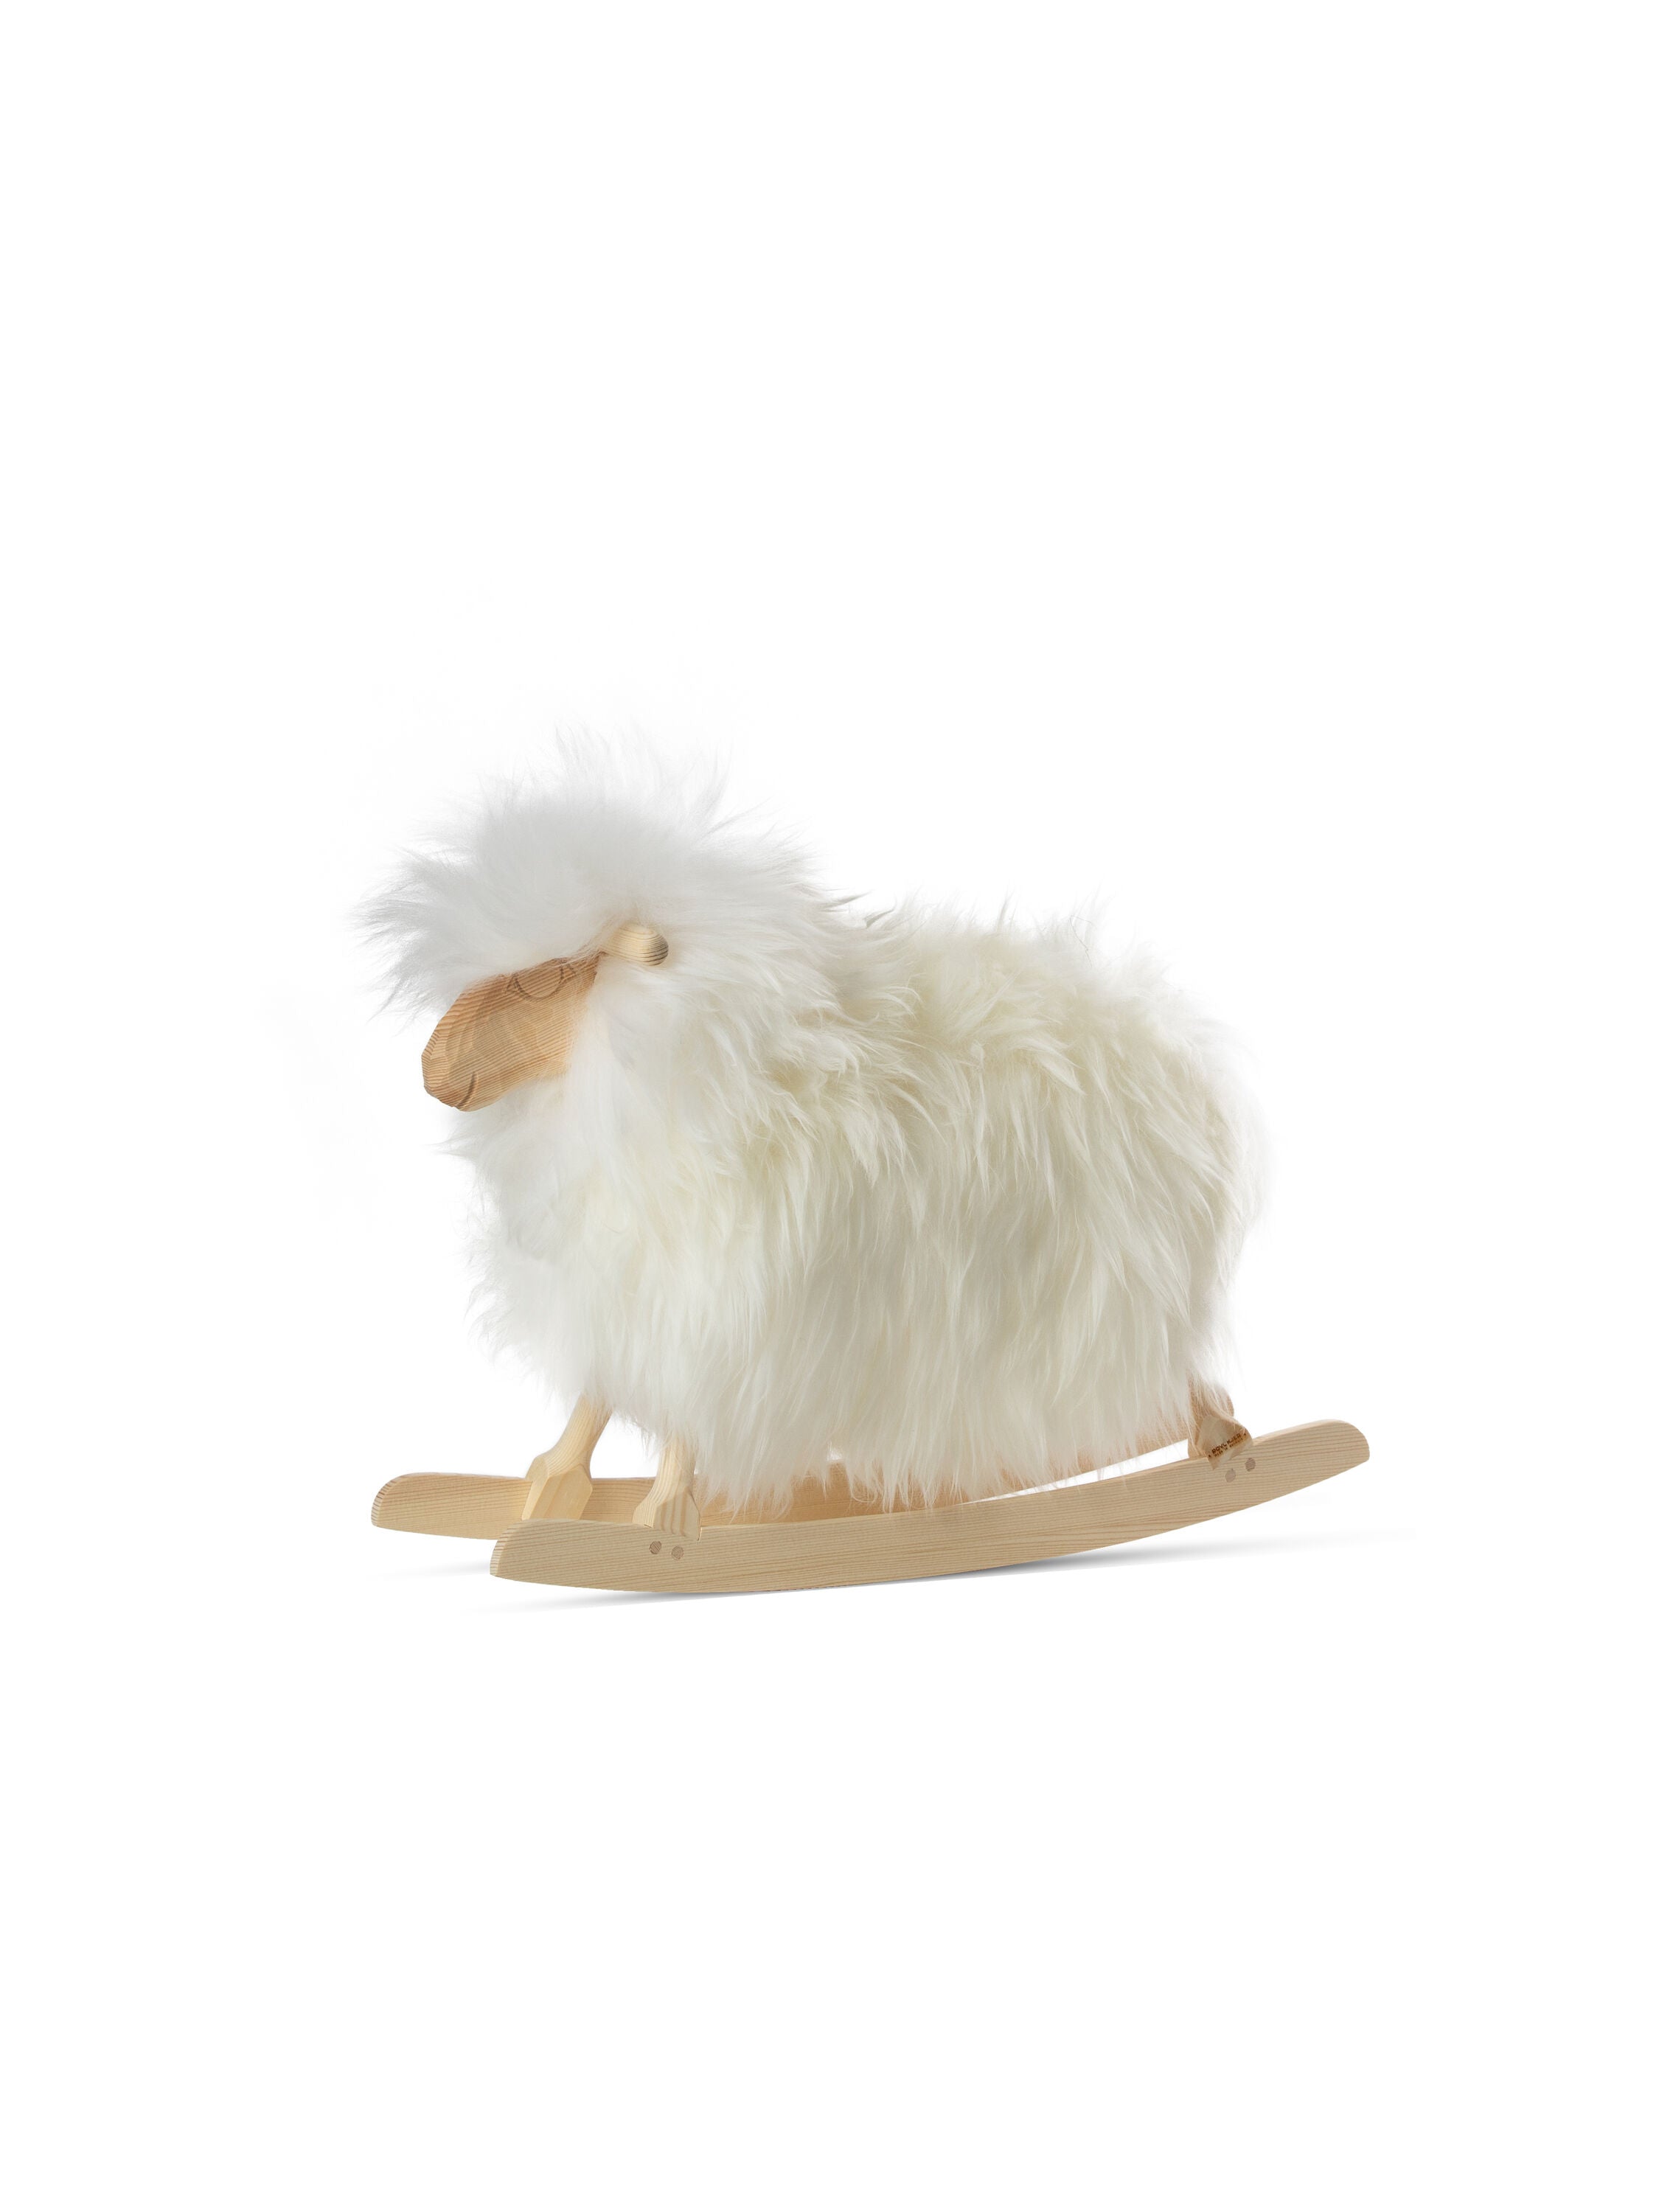 Rocking Sheep made of Pine Wood covered with Sheepskin, Long Wool. Size: L42xW13xH30 cm